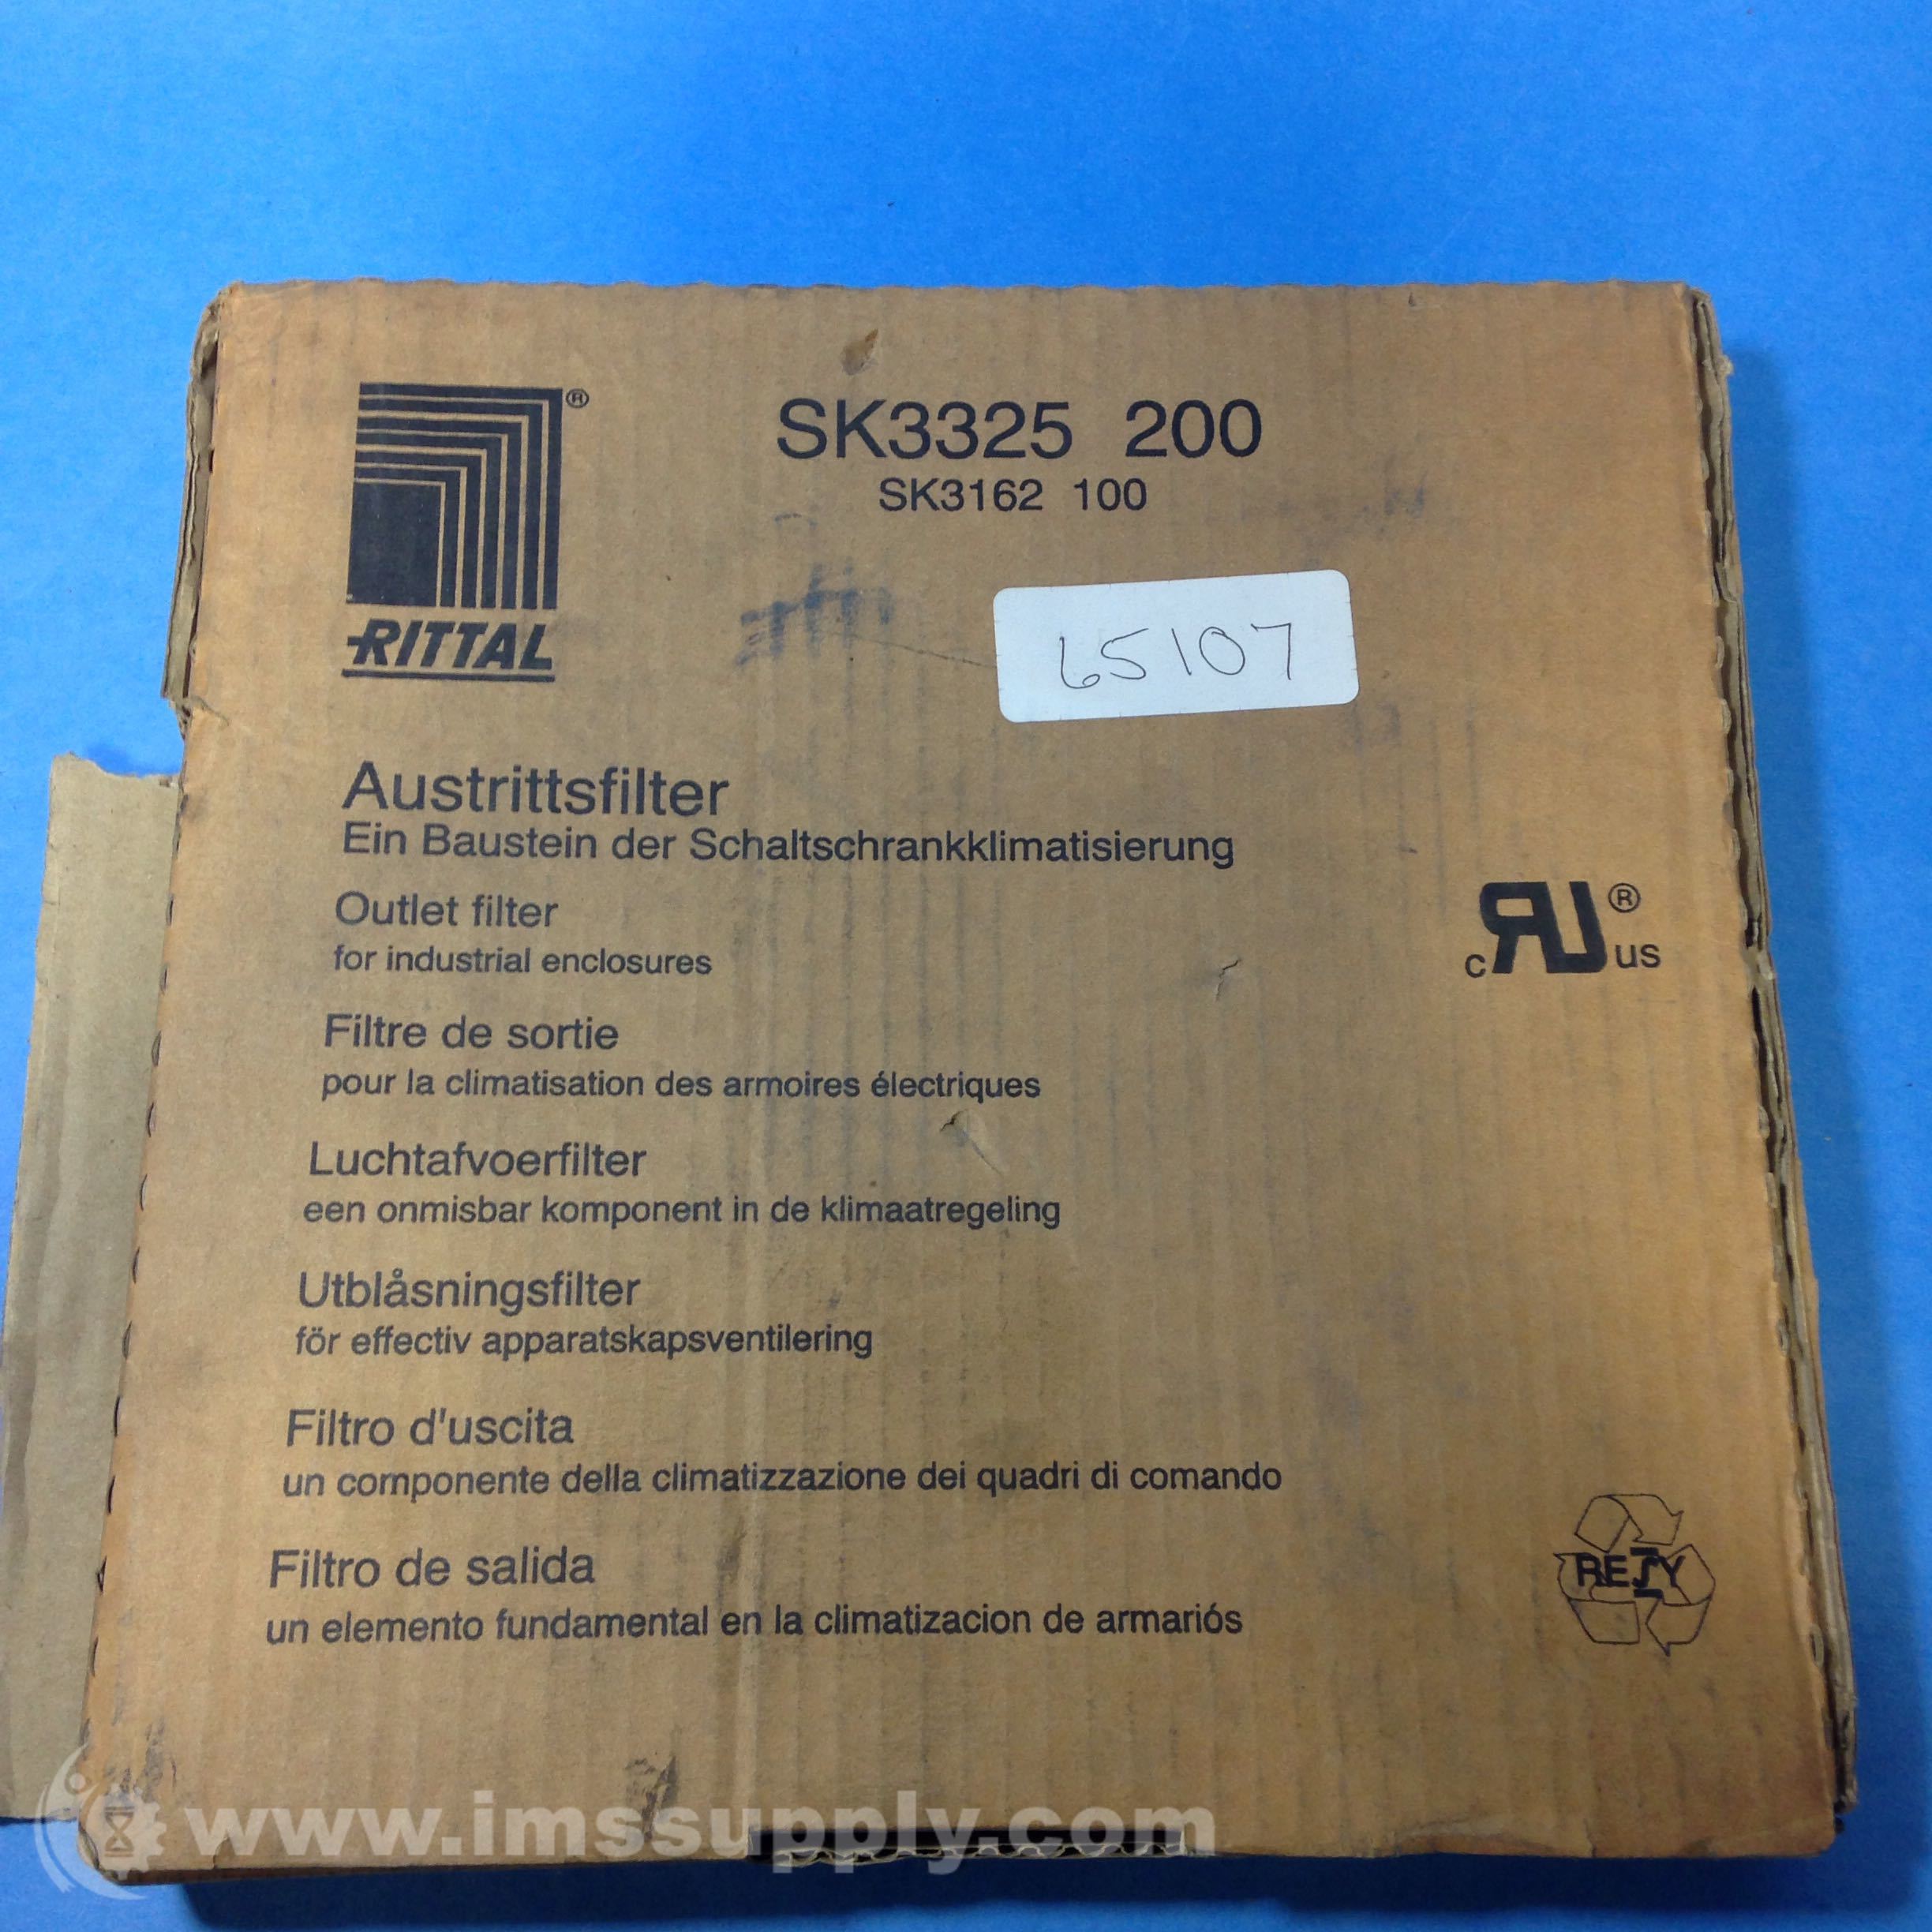 New in Box RITTAL SK3325 200 SK3162 100 Discharge Outlet Filter Grill Kit K11 